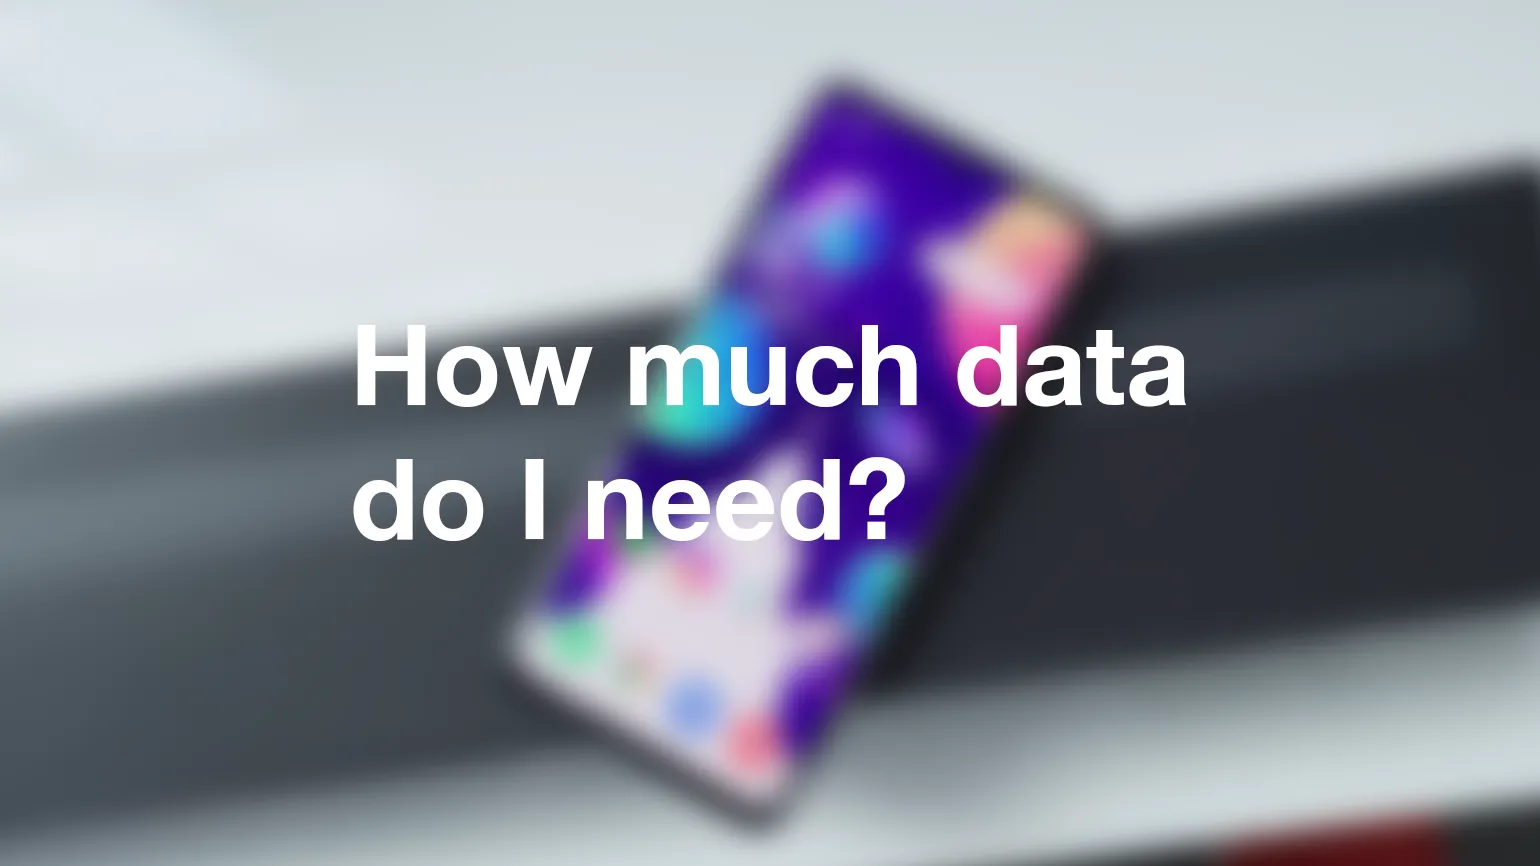 Accurately estimate your monthly data usage by analysing your specific phone usage patterns